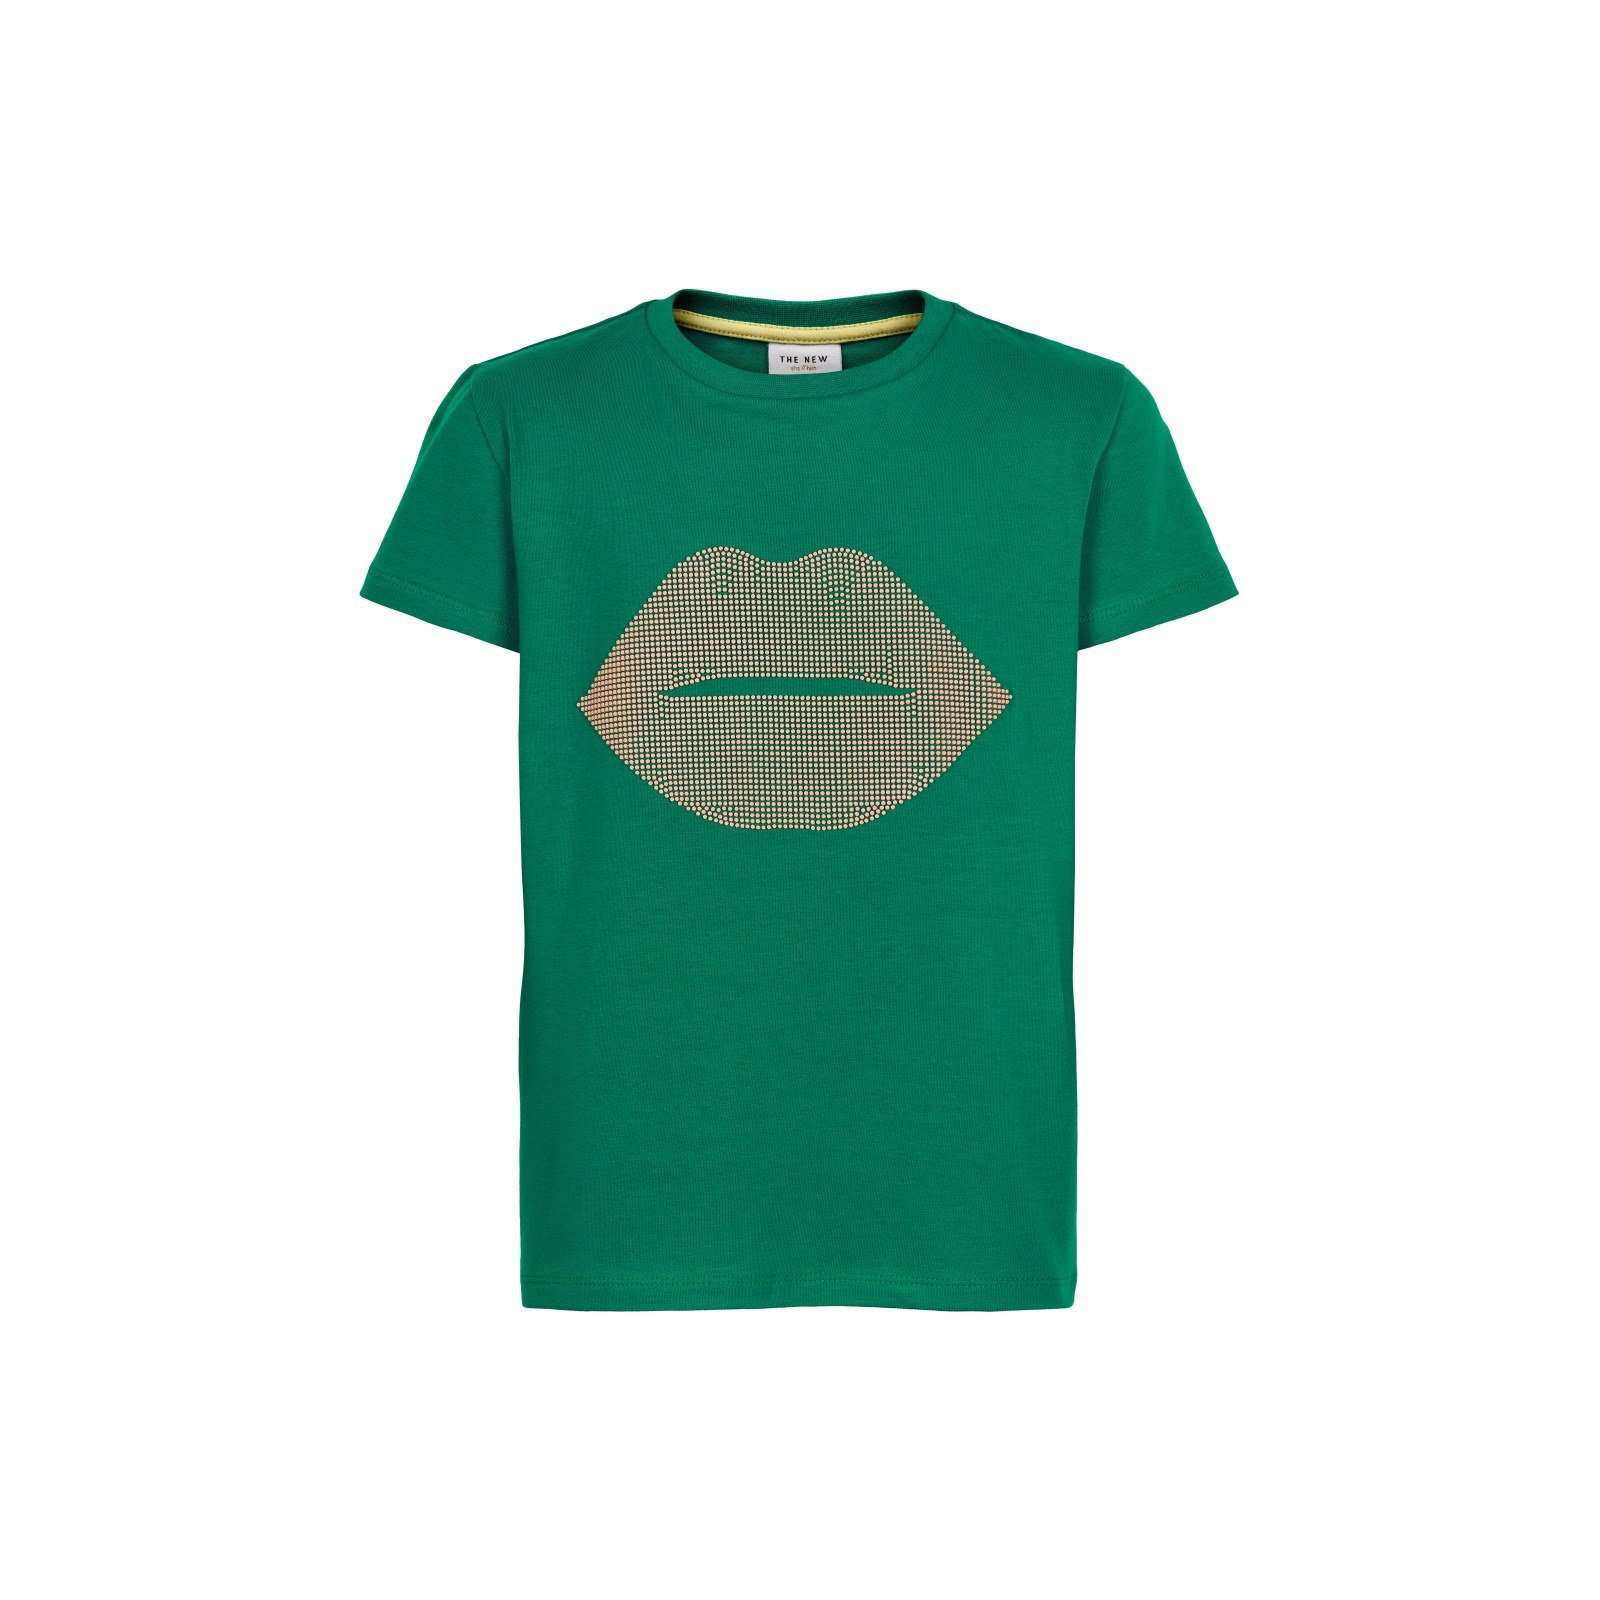 The New Tops 3T/4T Oddveig Tee